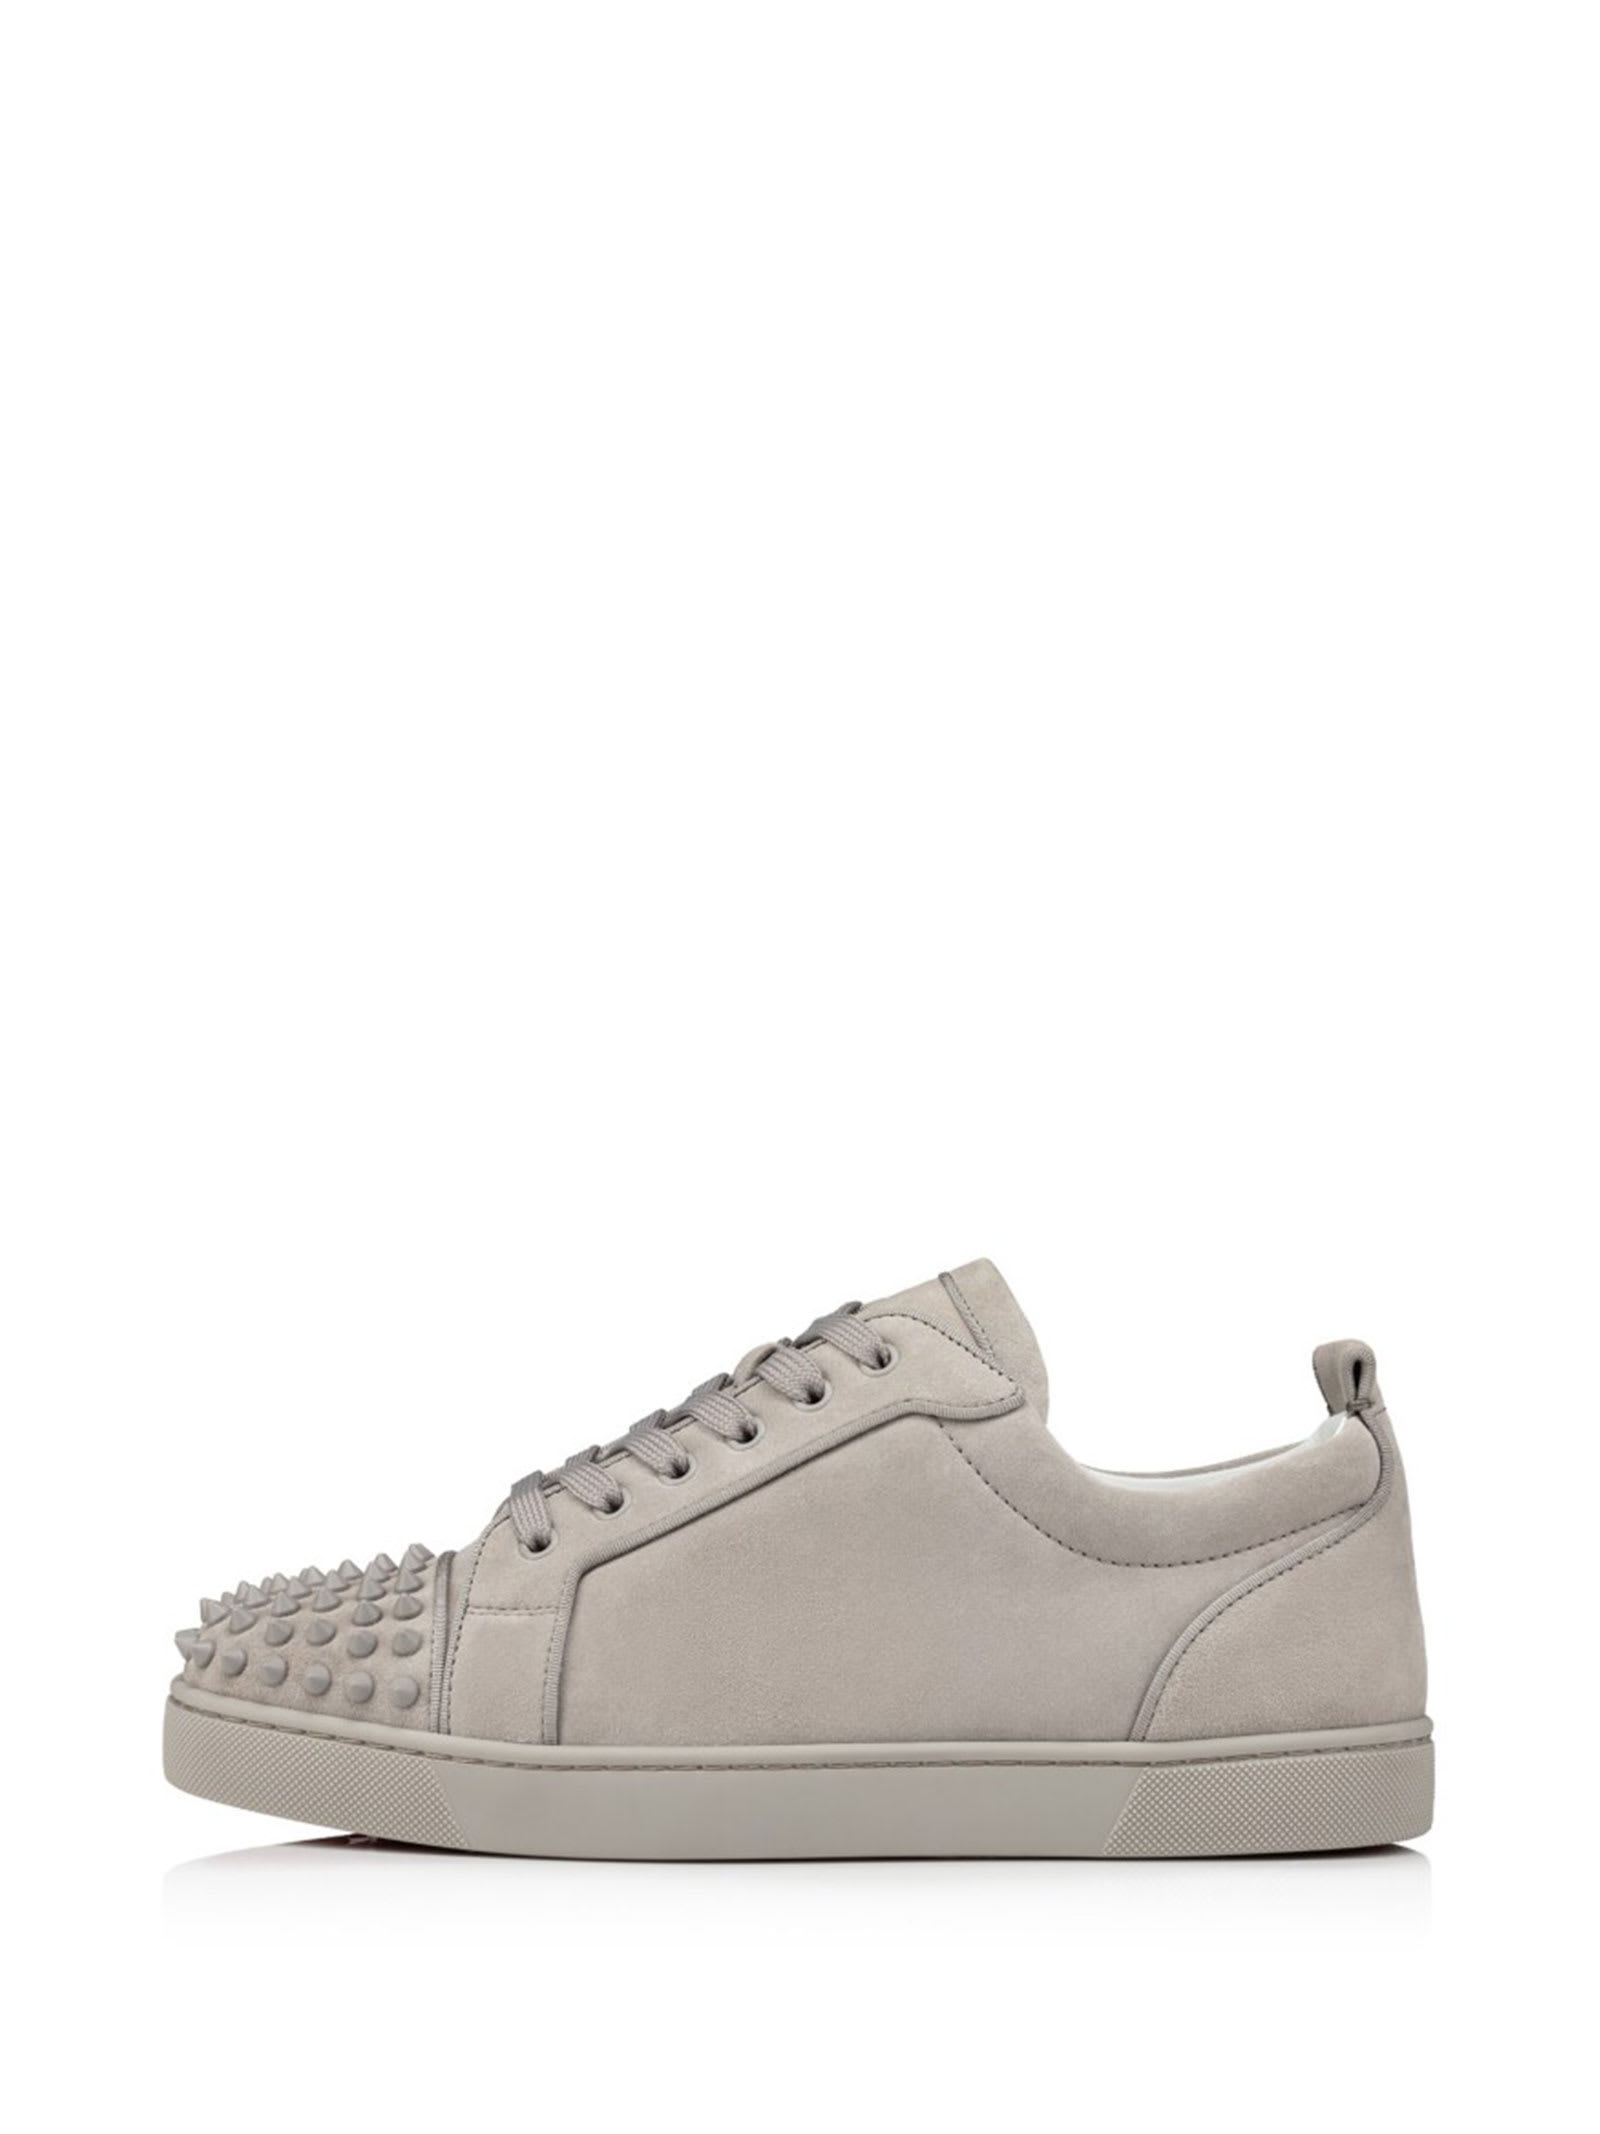 CHRISTIAN LOUBOUTIN LOUIS JUNIOR SNEAKER WITH SPIKES